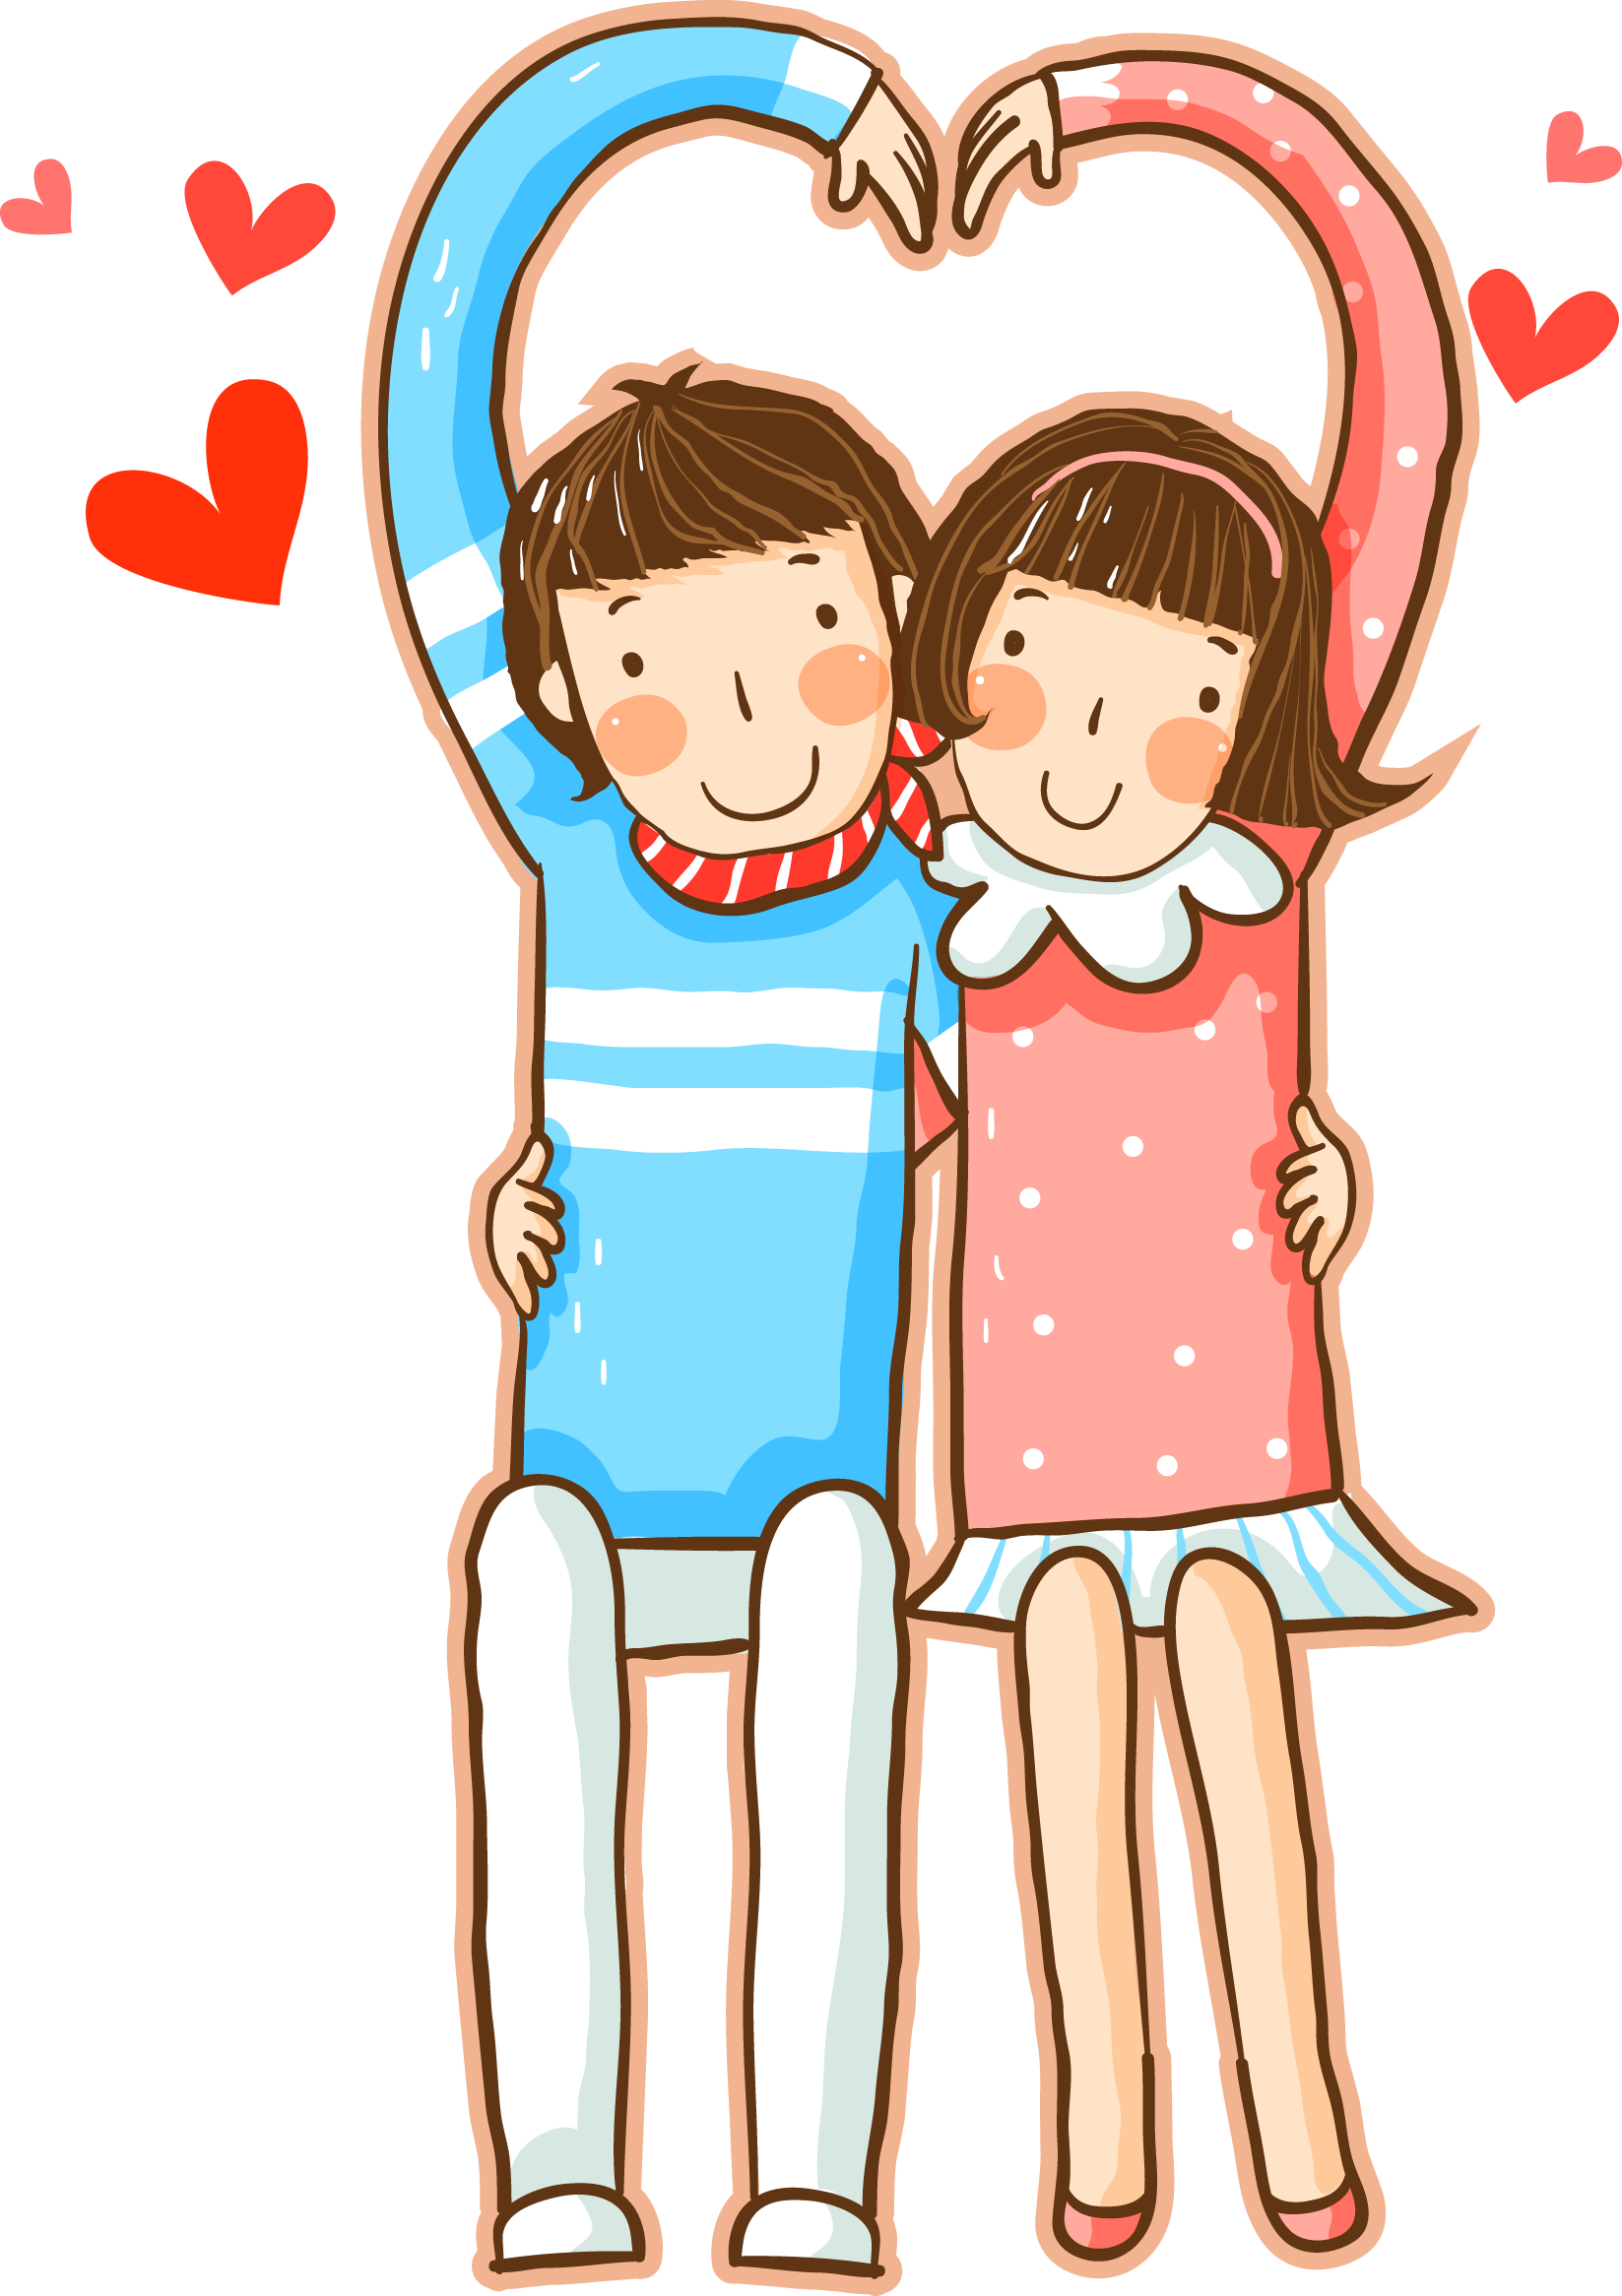 Download 1647 X 2332 8 - Heart Love Couple Cartoon PNG Image with No  Background 